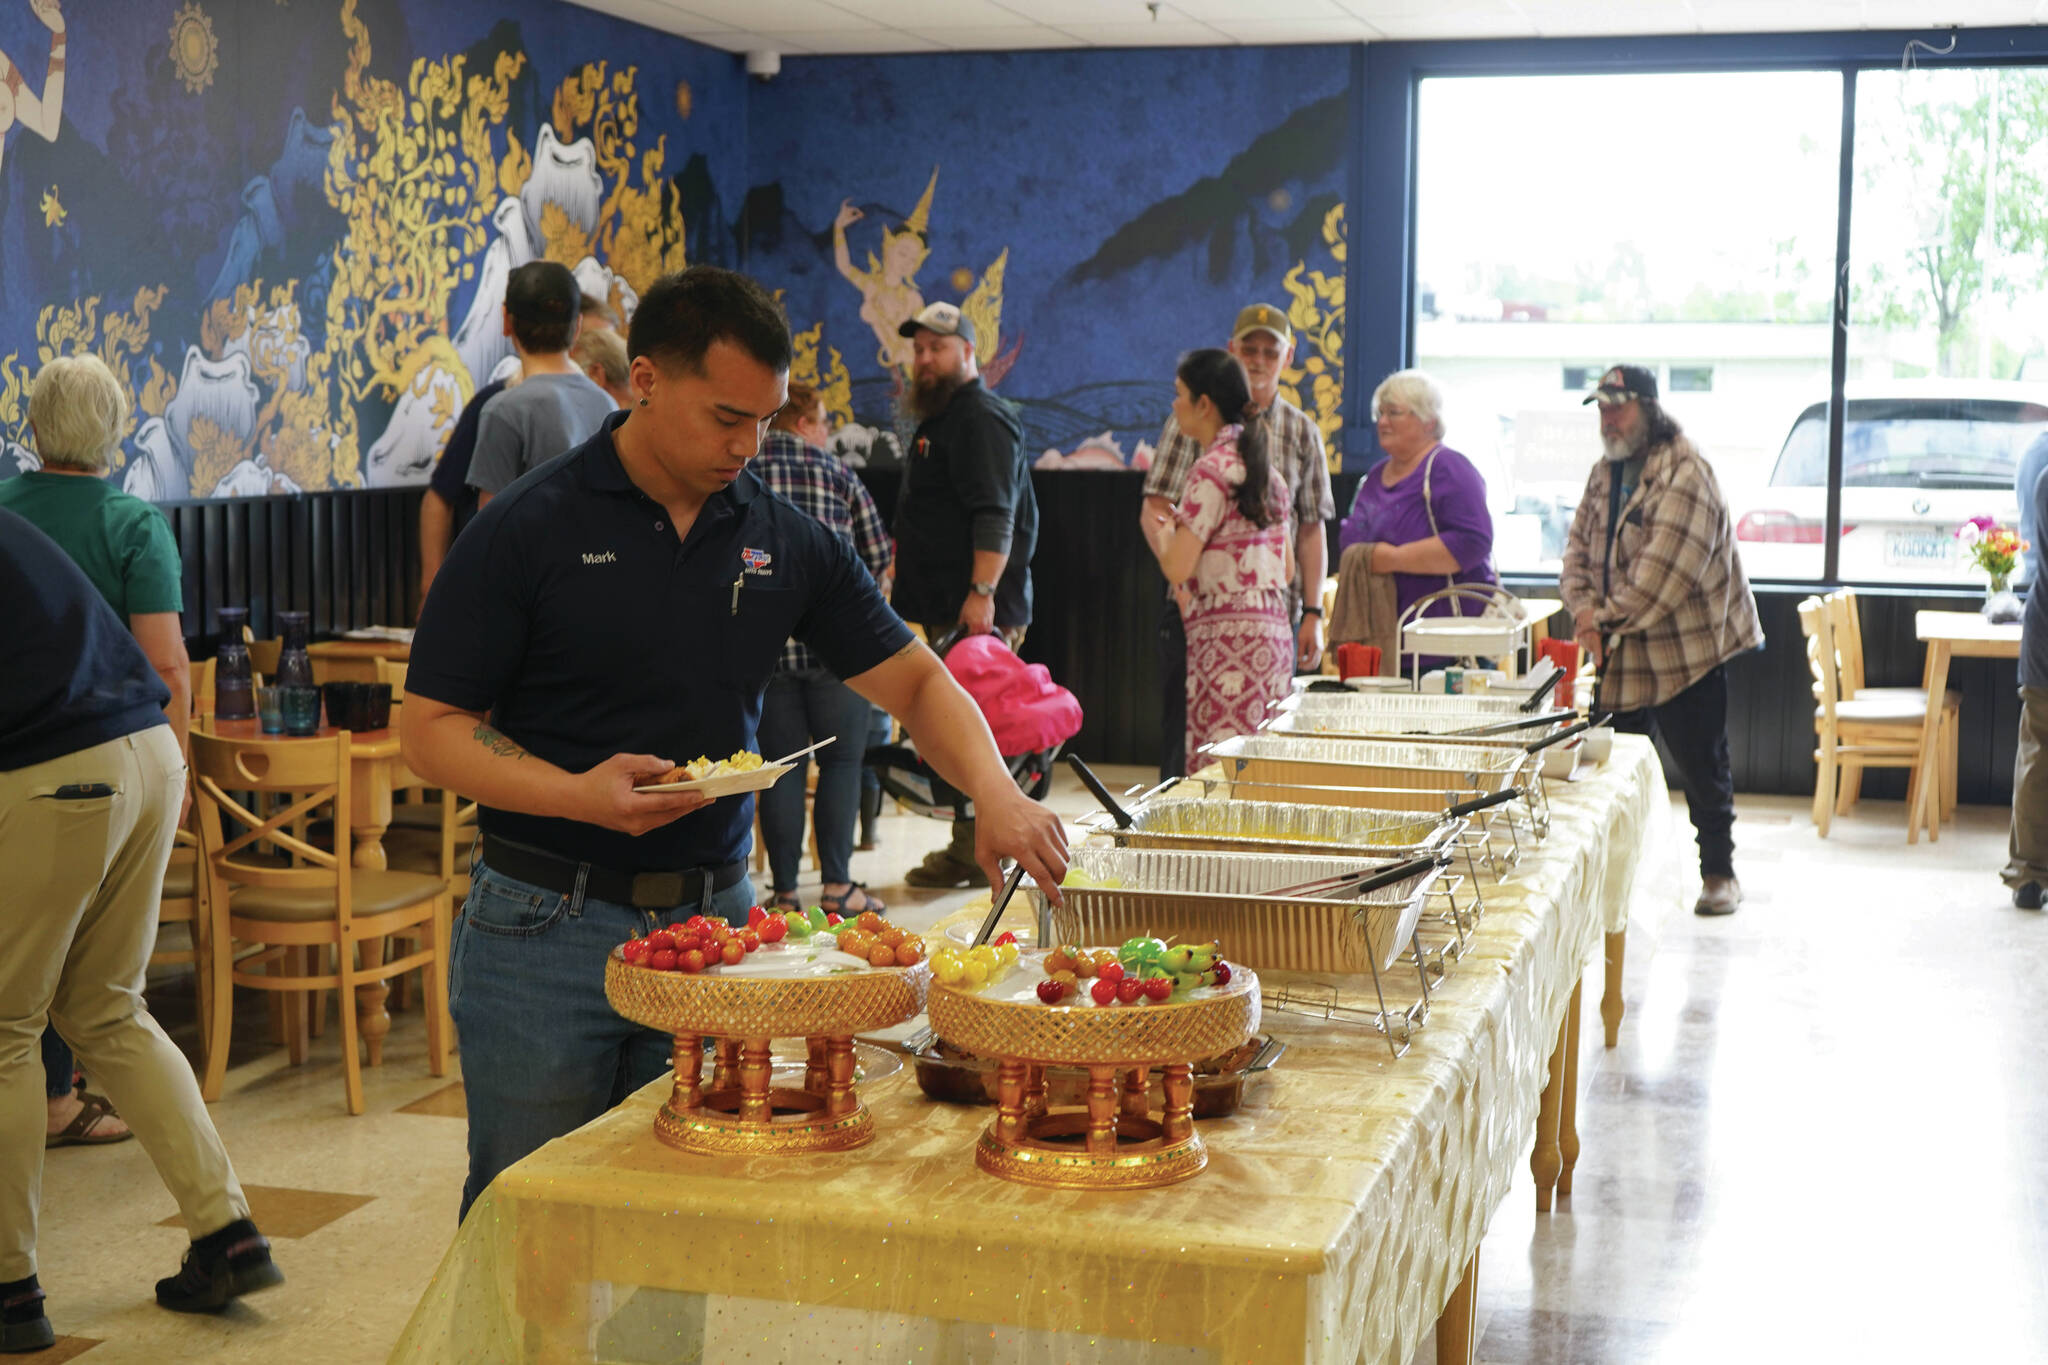 Jake Dye/Peninsula Clarion
Attendees take food from a buffet during the grand opening of Siam Noodles and Food in Kenai on Tuesday.